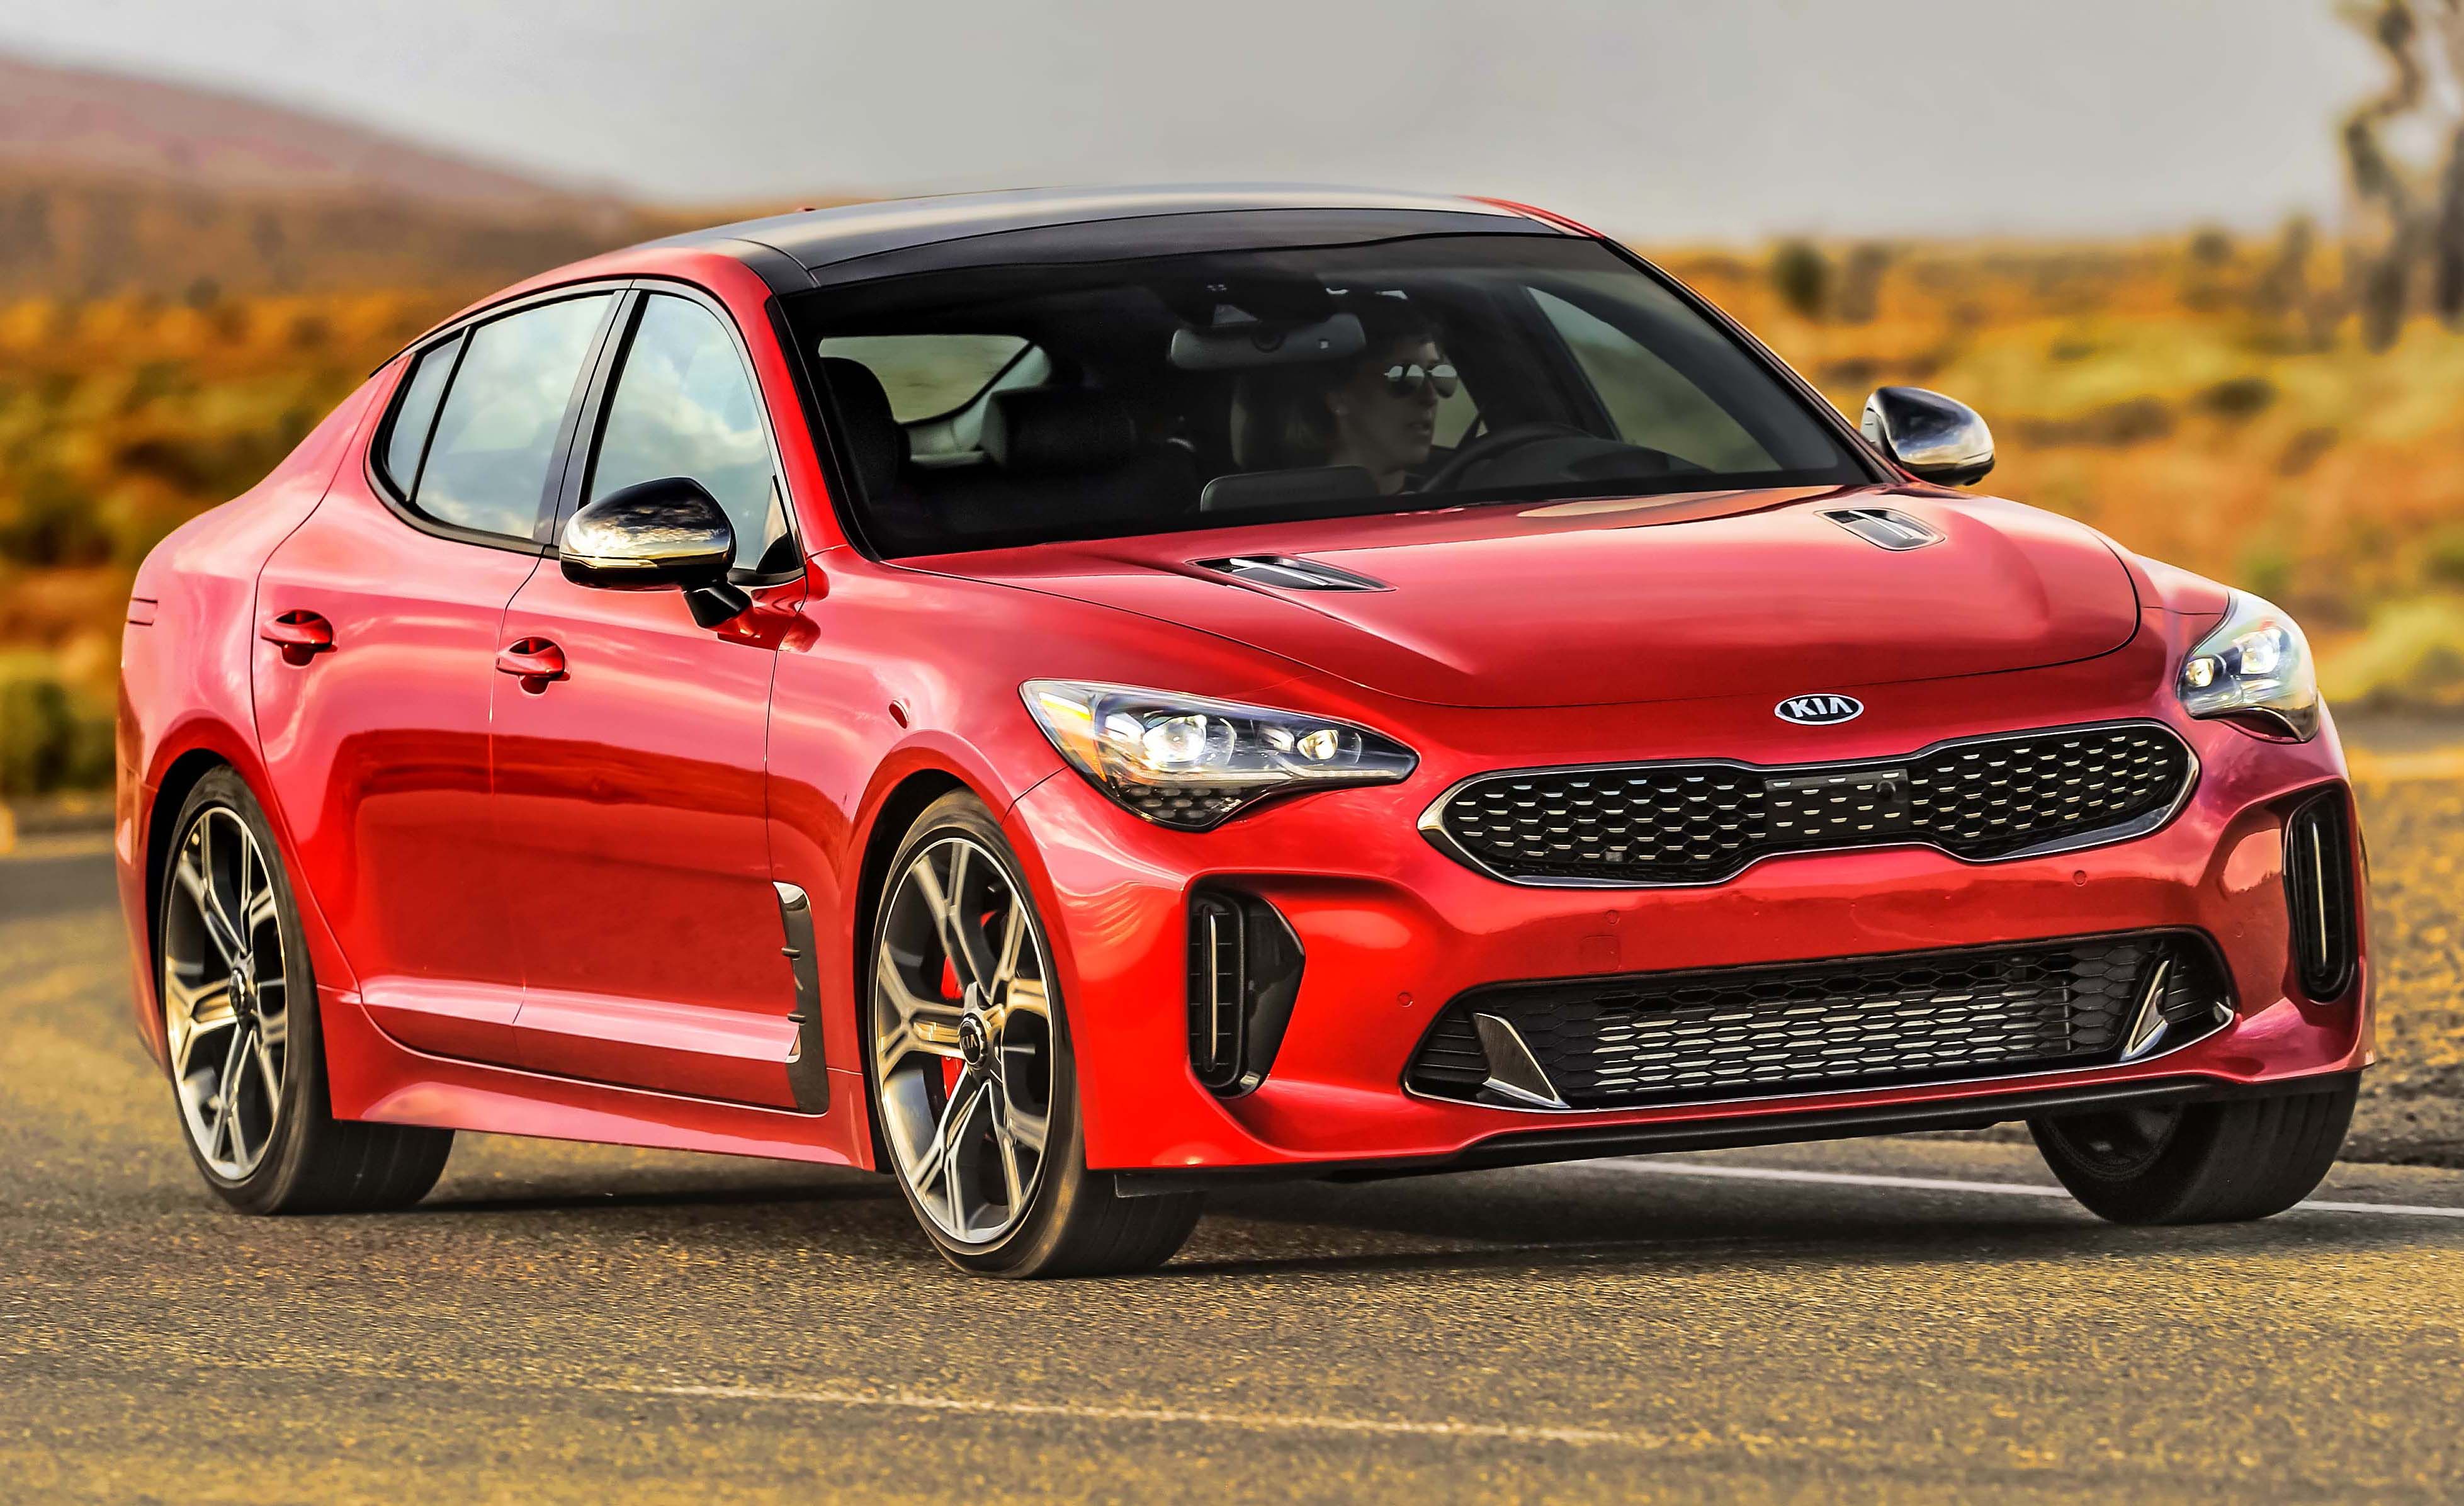 2019 Kia Stinger Adds More Standard Equipment Base Price Rises by 1000